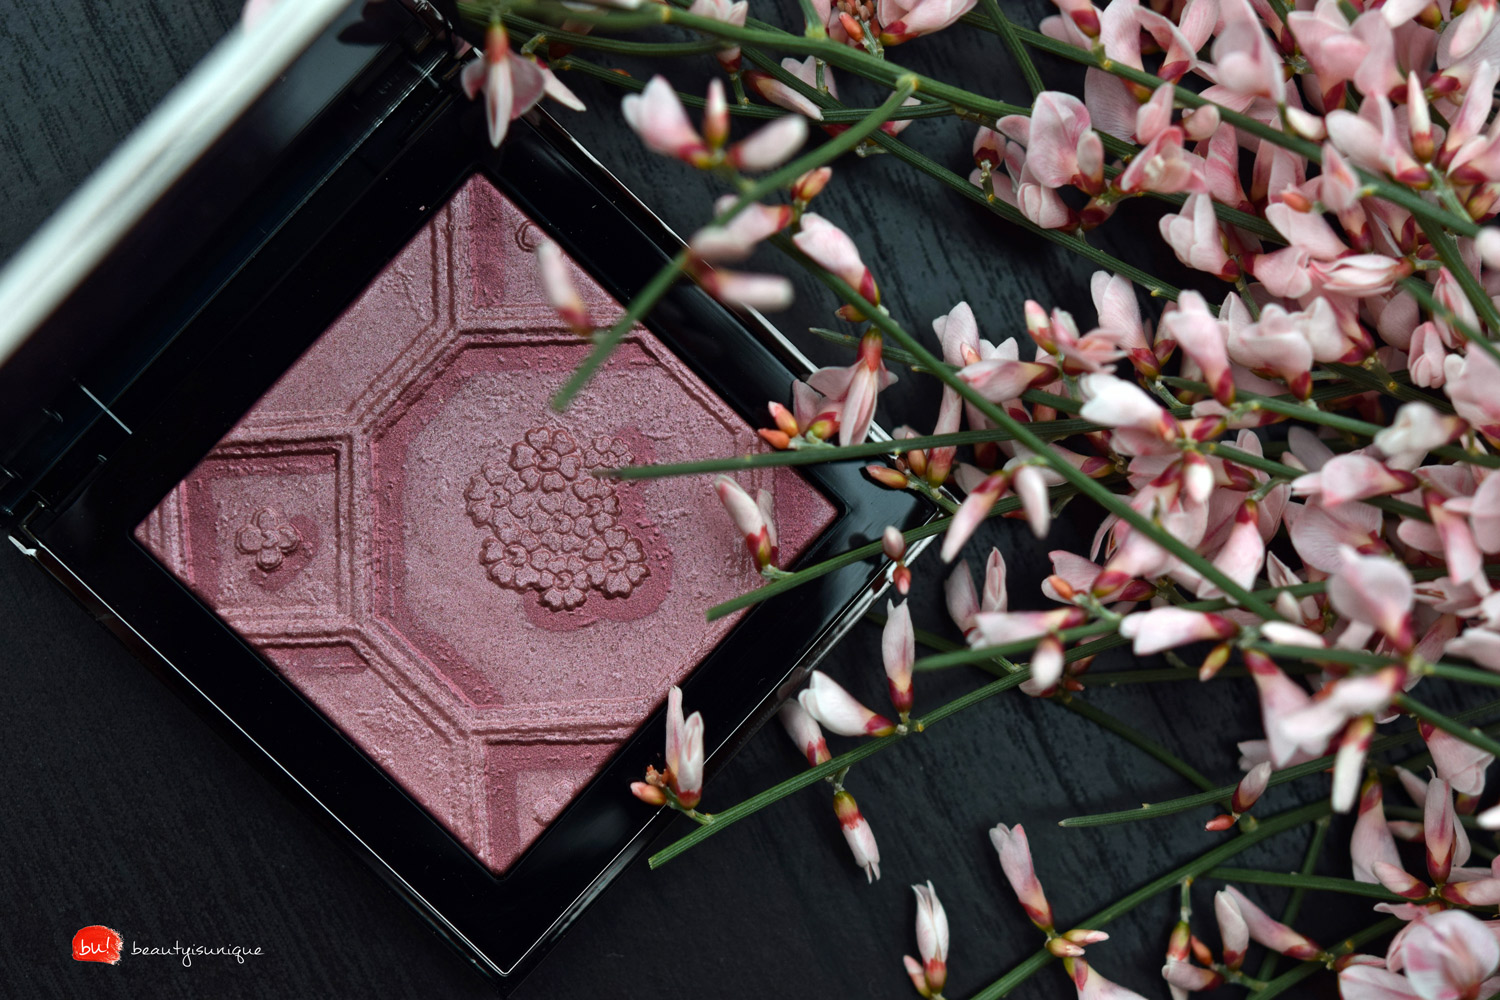 Burberry-silk-and-bloom-blush-palette